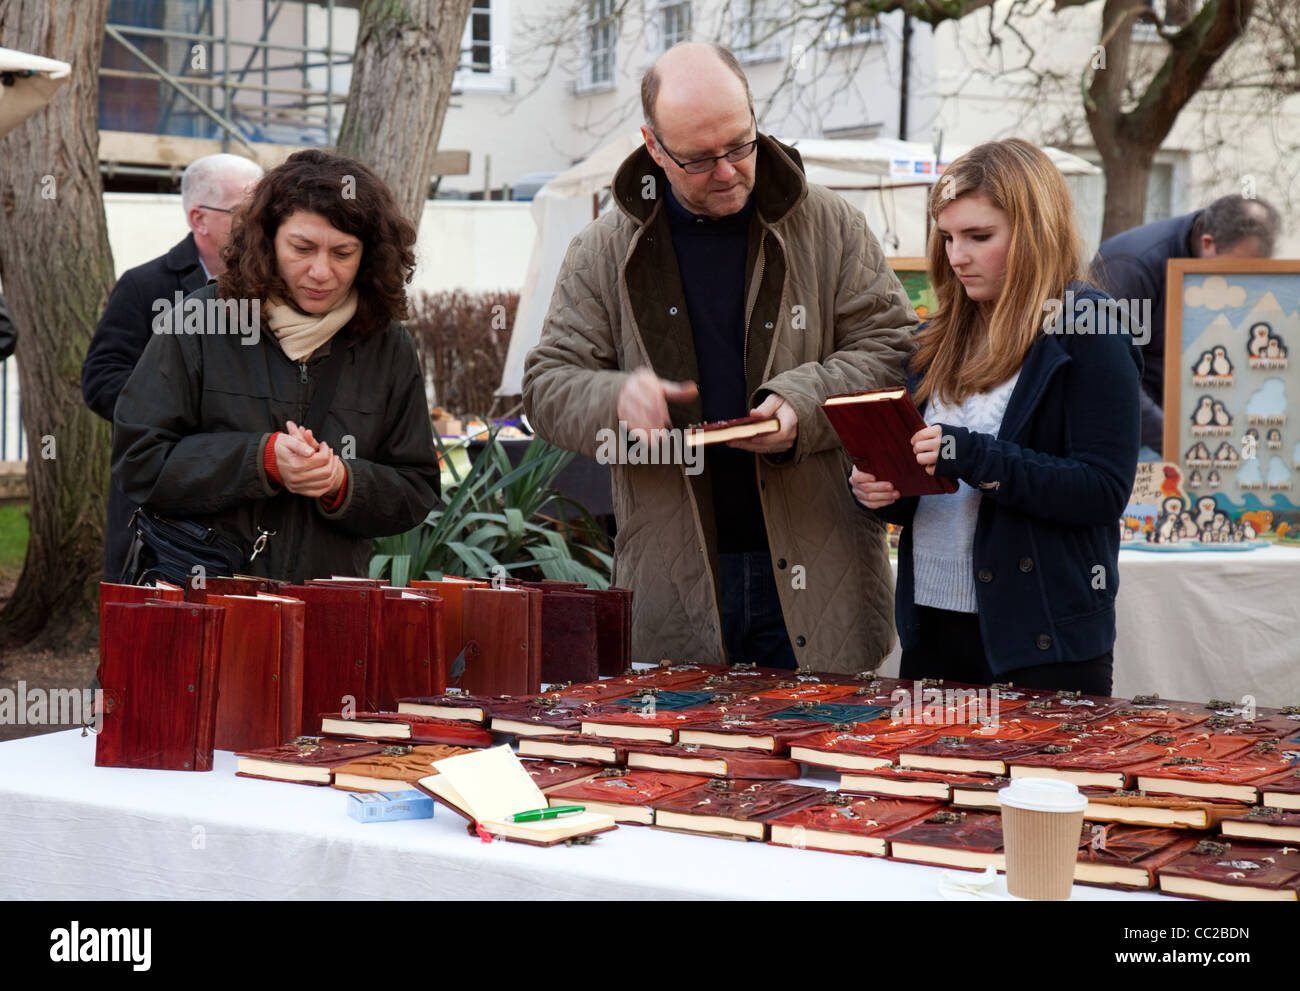 People looking at homemade notebooks at the All Saints Craft Market, Trinity Street Cambridge UK Stock Photo